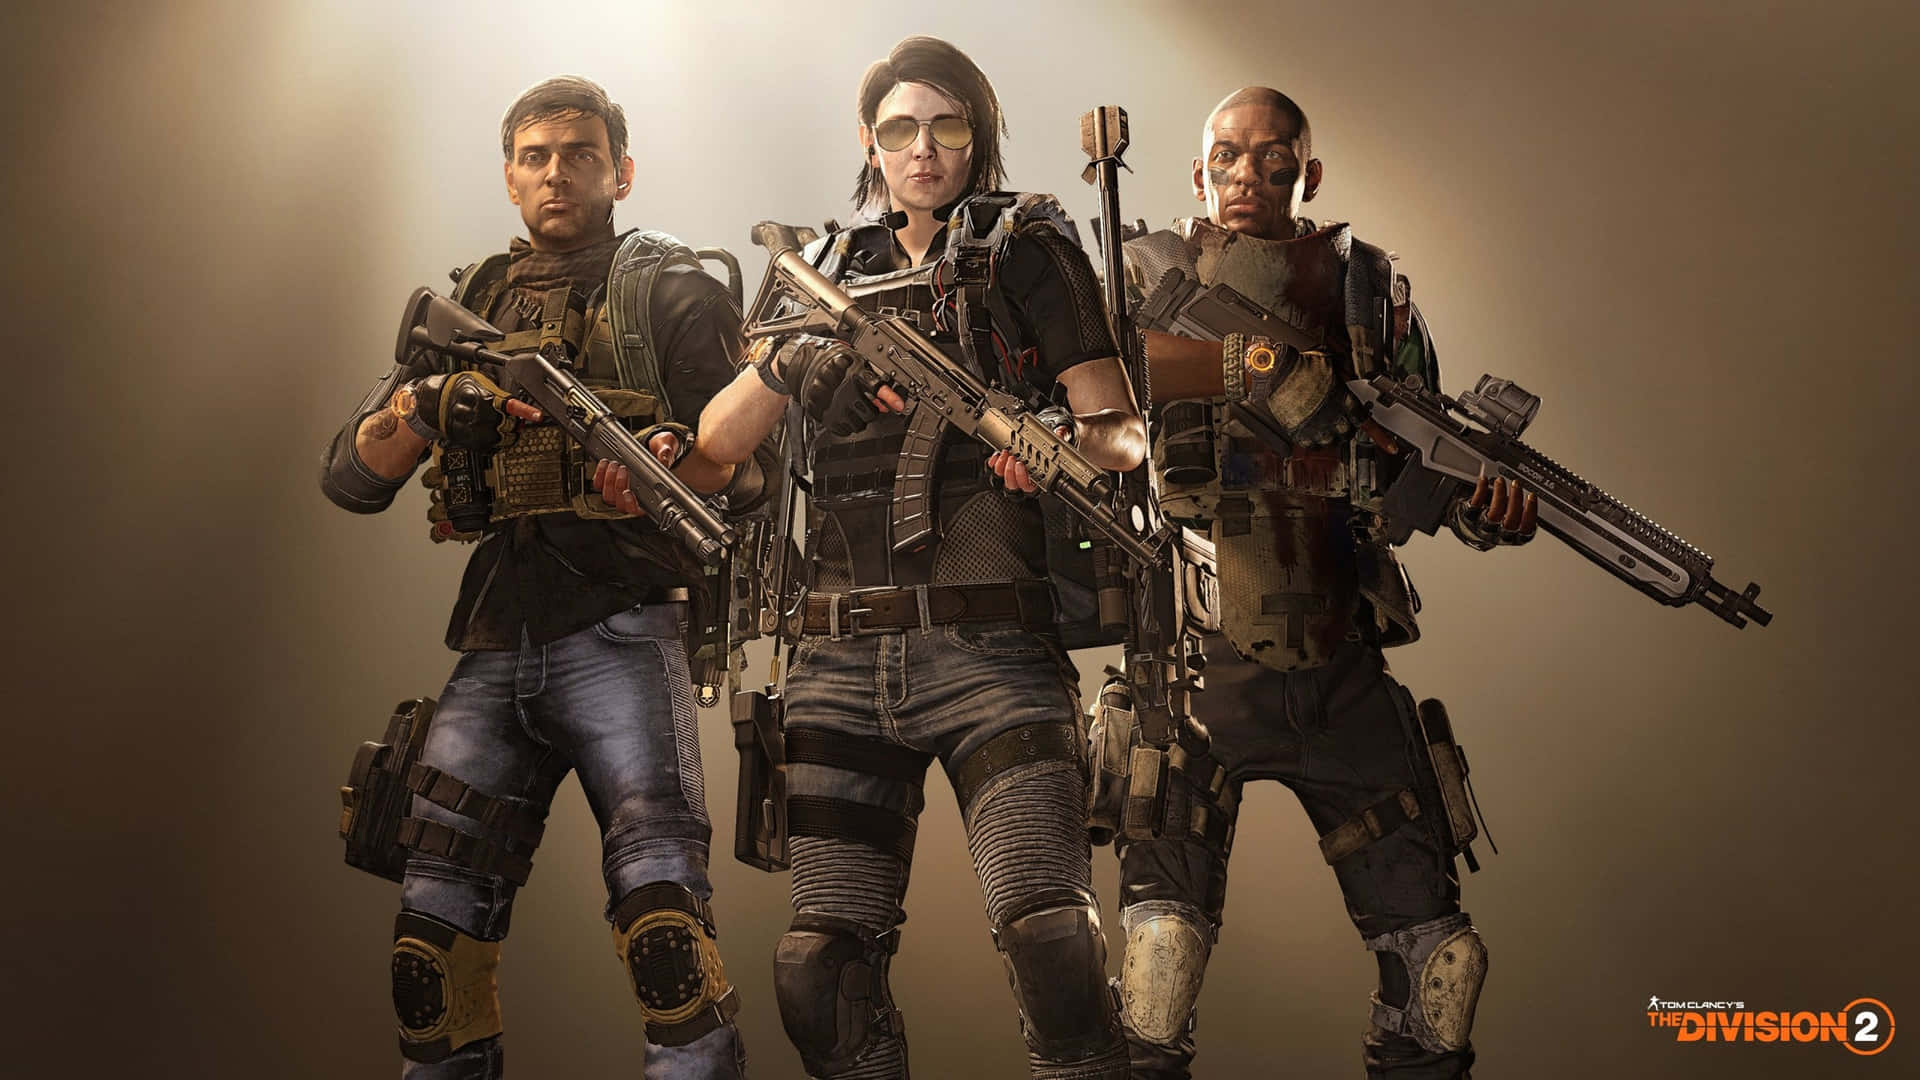 Fight the Enemy in The Division 2 4k Wallpaper